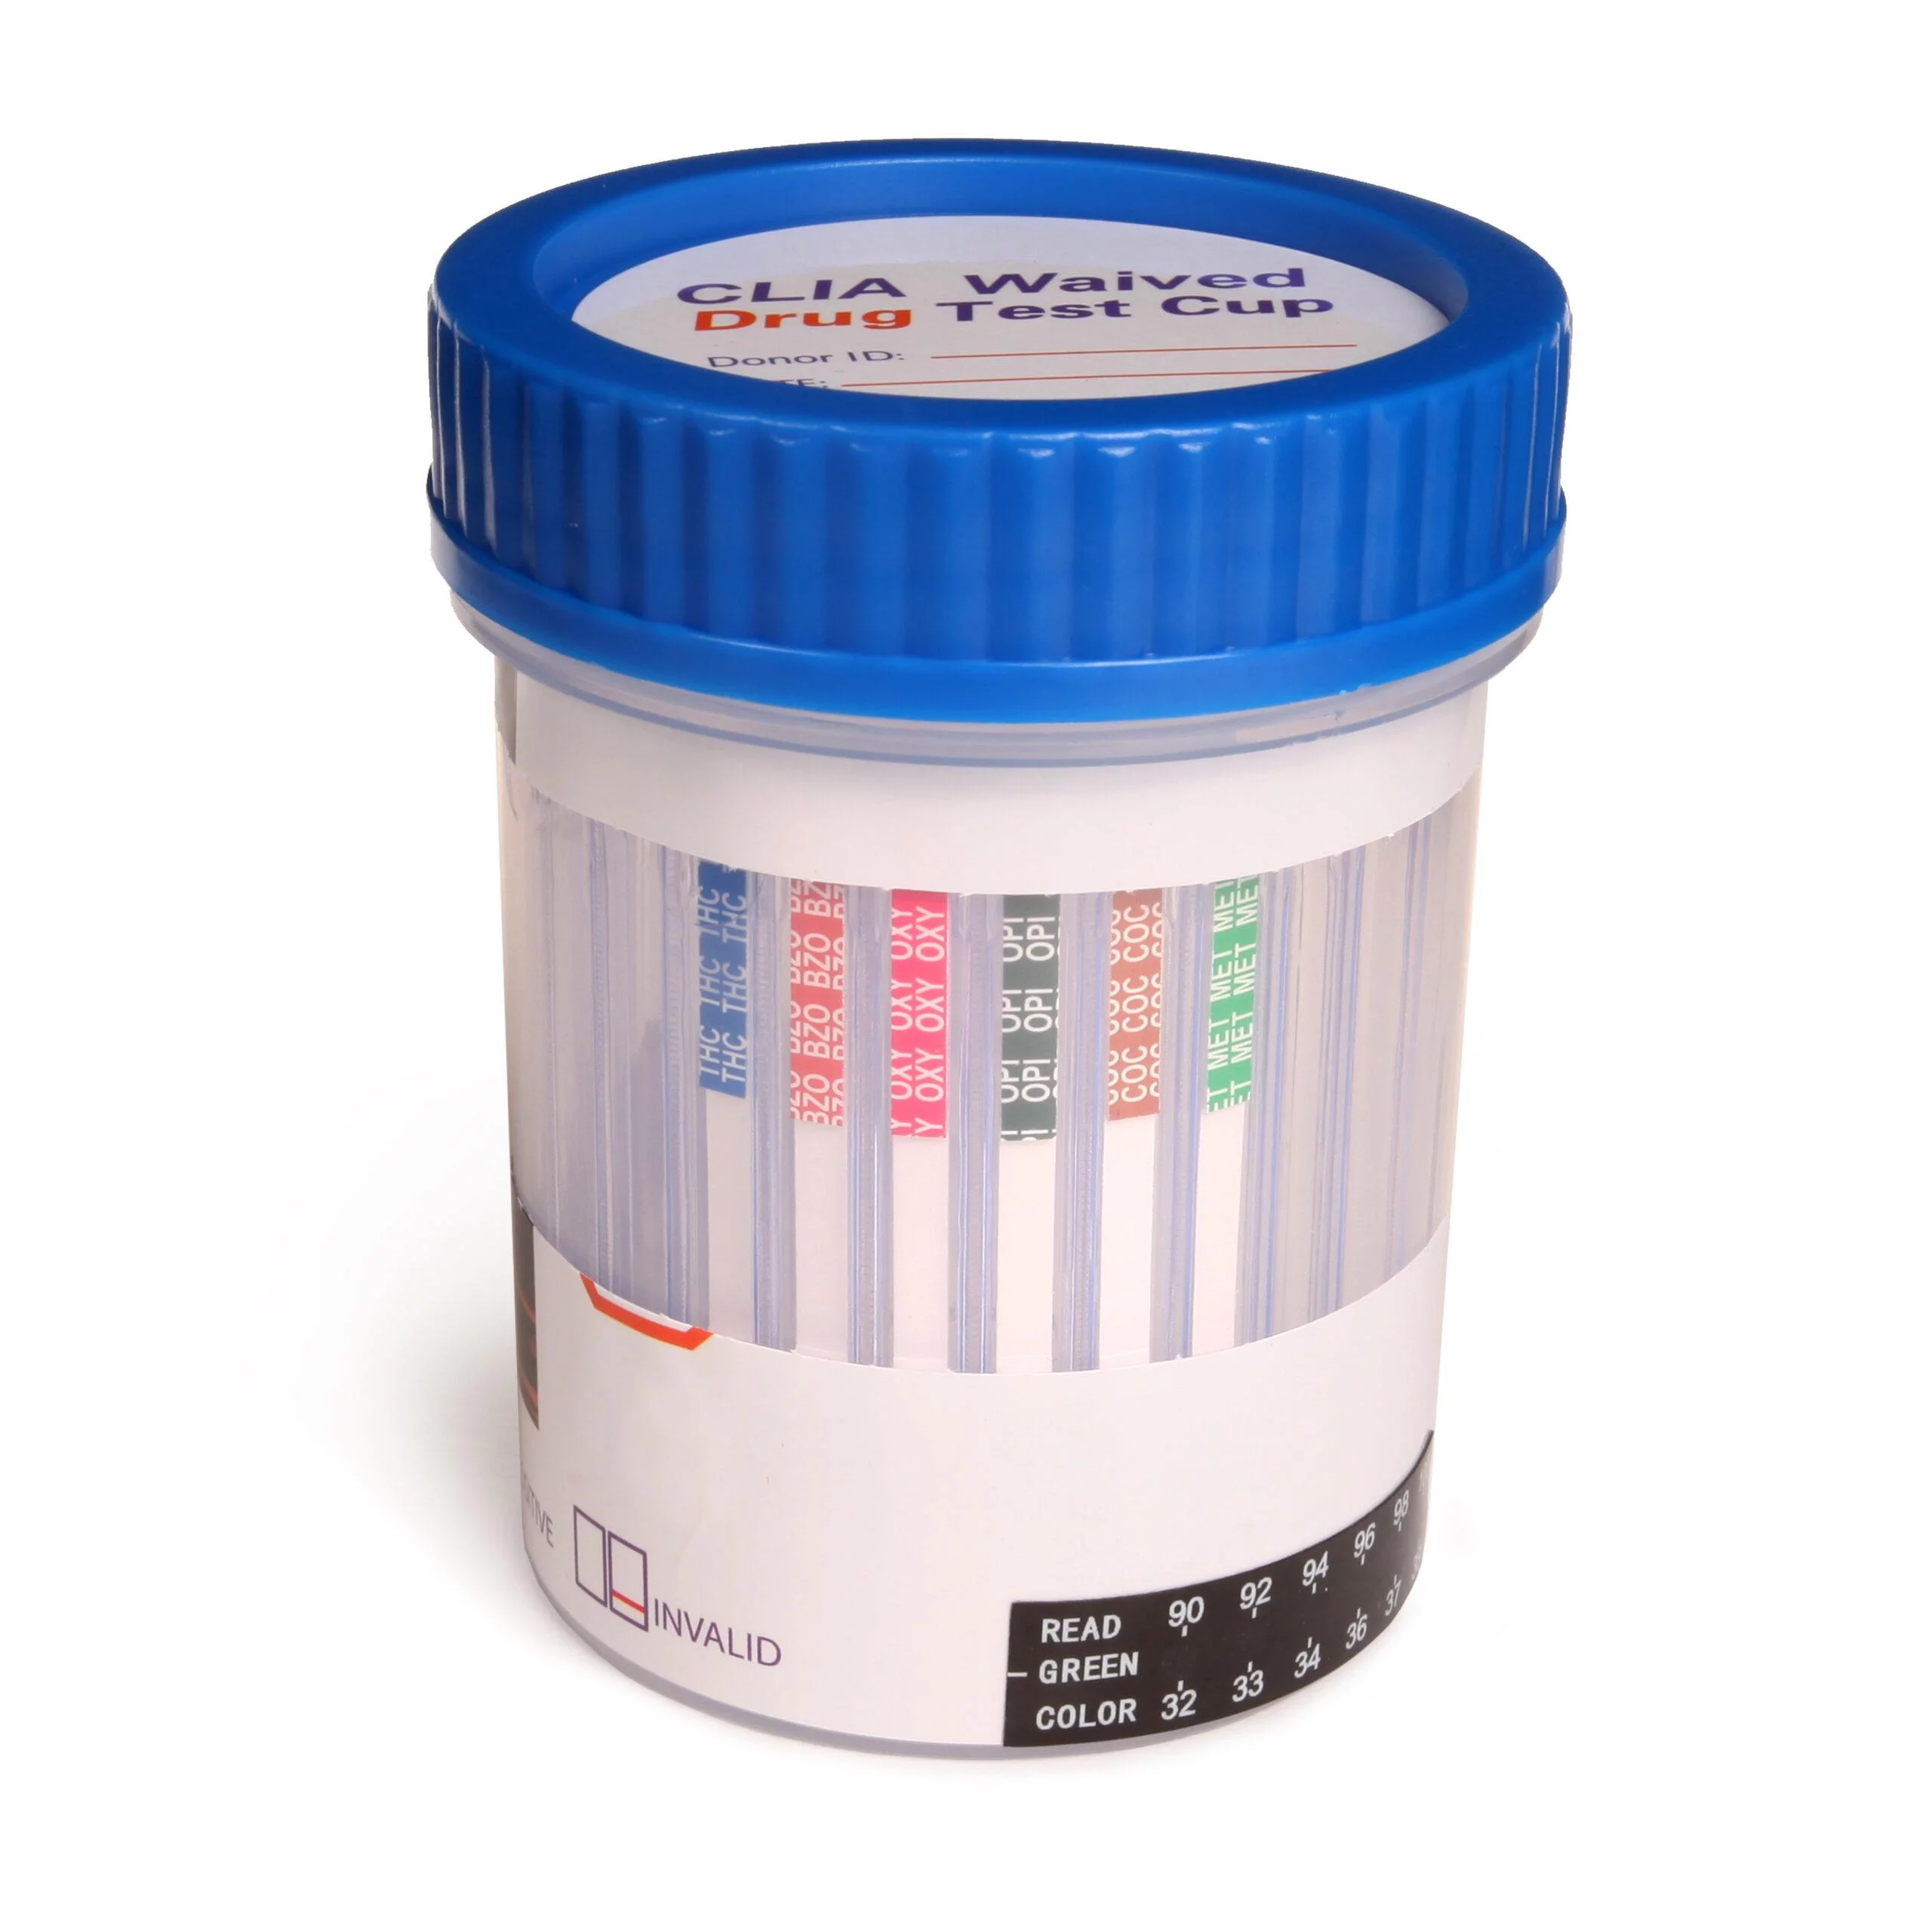 6 Panel Drug Test Cup CLIA Waived